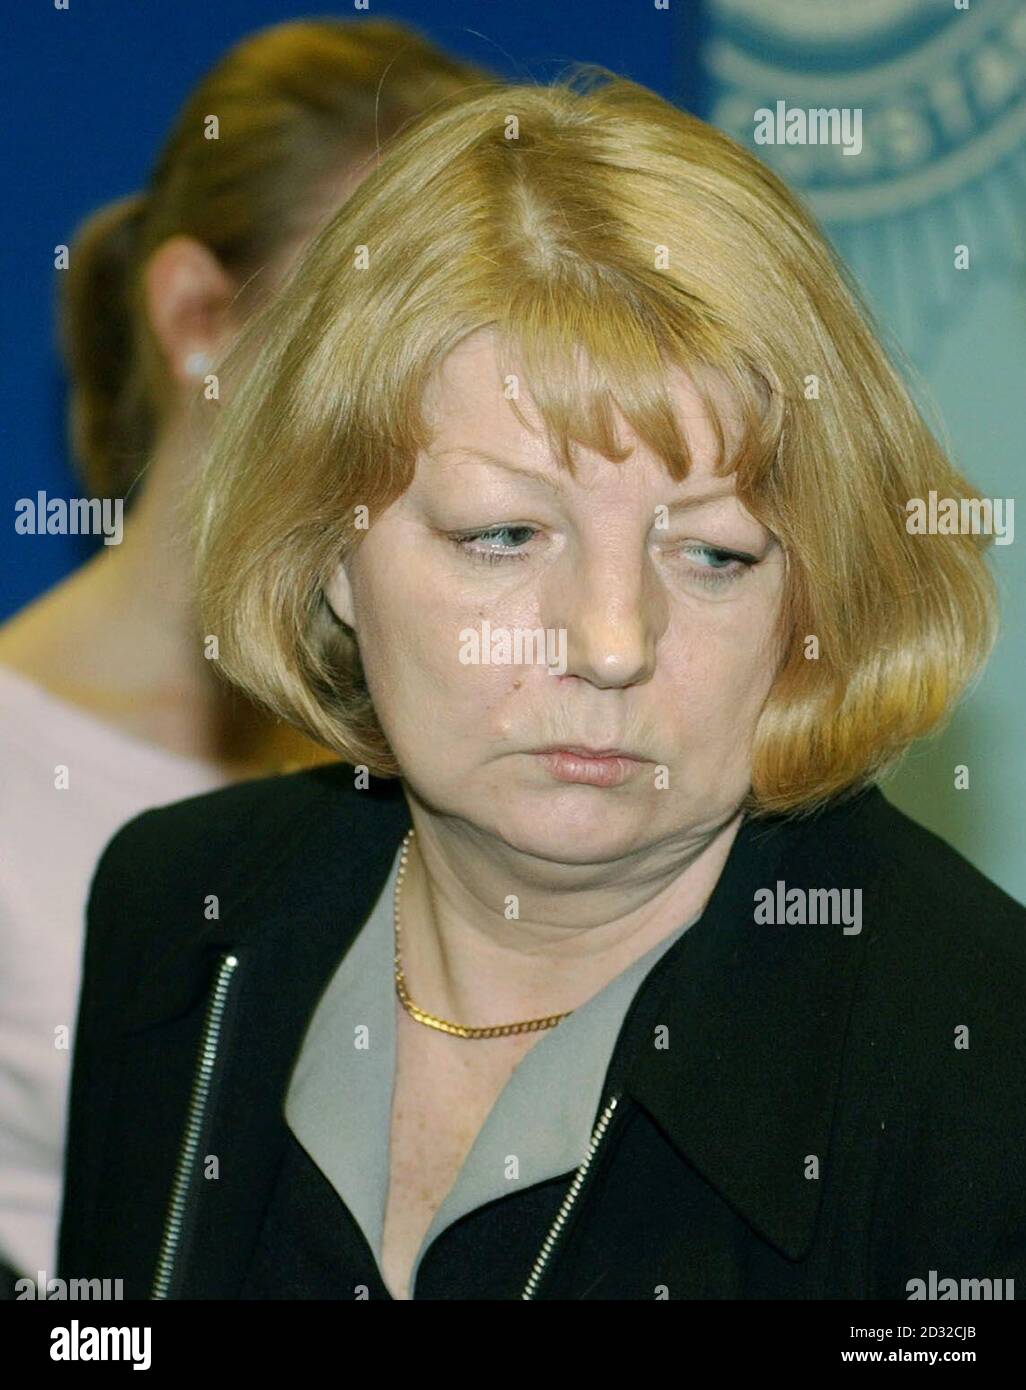 Halina Janiak, mother of murdered girl Natalie Janiak whose body was found near Dartford in Kent, is pictured at a press conference near Maidstone. The distraught mother of the murdered teenage girl strangled in an alleyway described the last time that she spoke to her daughter.   * Natalie, from Greenwich, south east London, was found in an alleyway in Wilmington, near Dartford, by a man walking his dog. She had been out near her home in Blackheath in London on Friday but did not return home.  Stock Photo